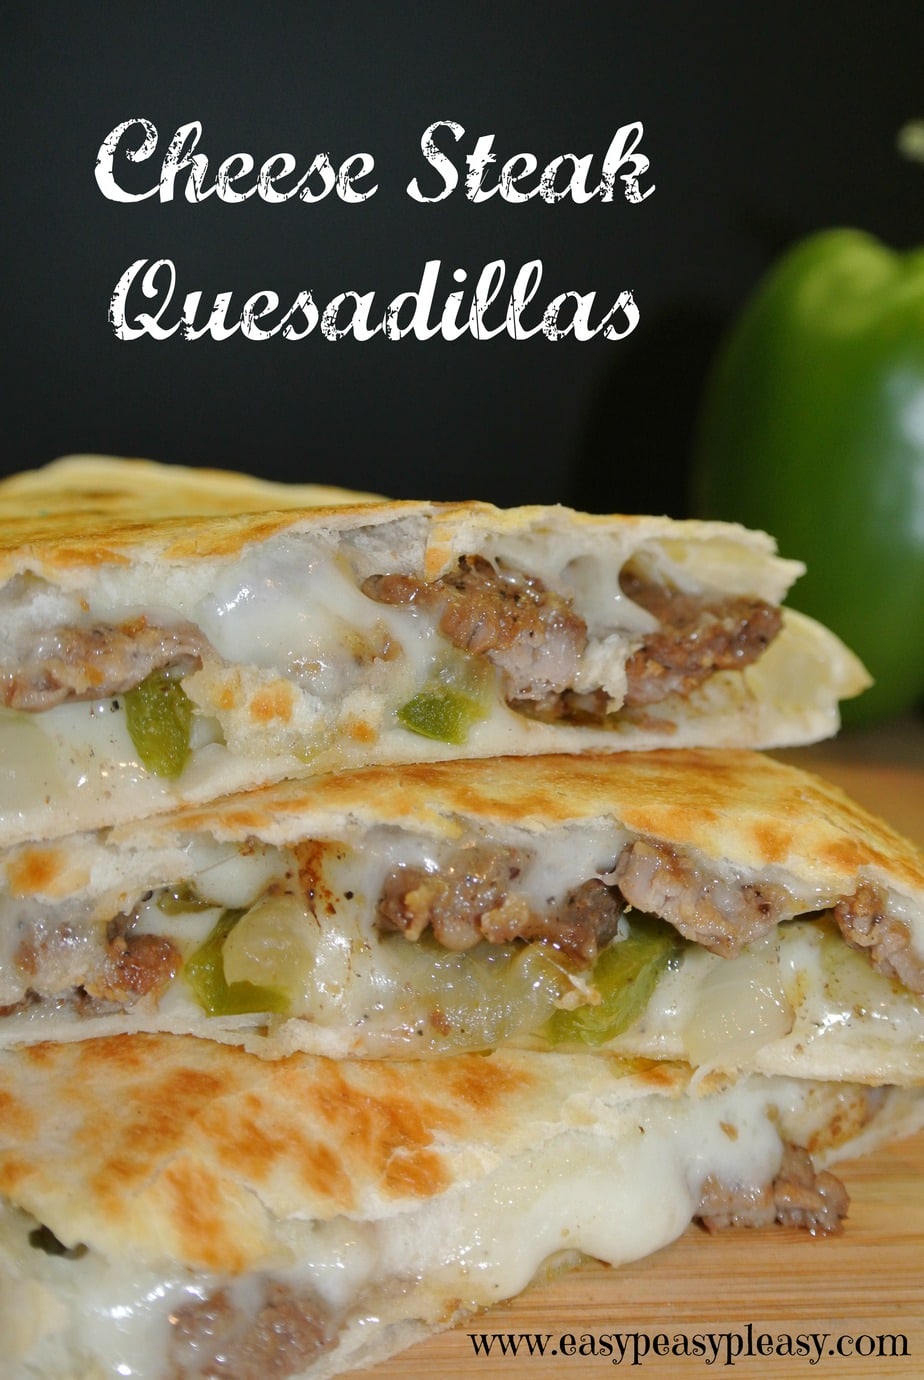 Needing a twist on the classic Quesadilla Try these Cheese Steak Quesadillas to spice up the basic quesadilla!